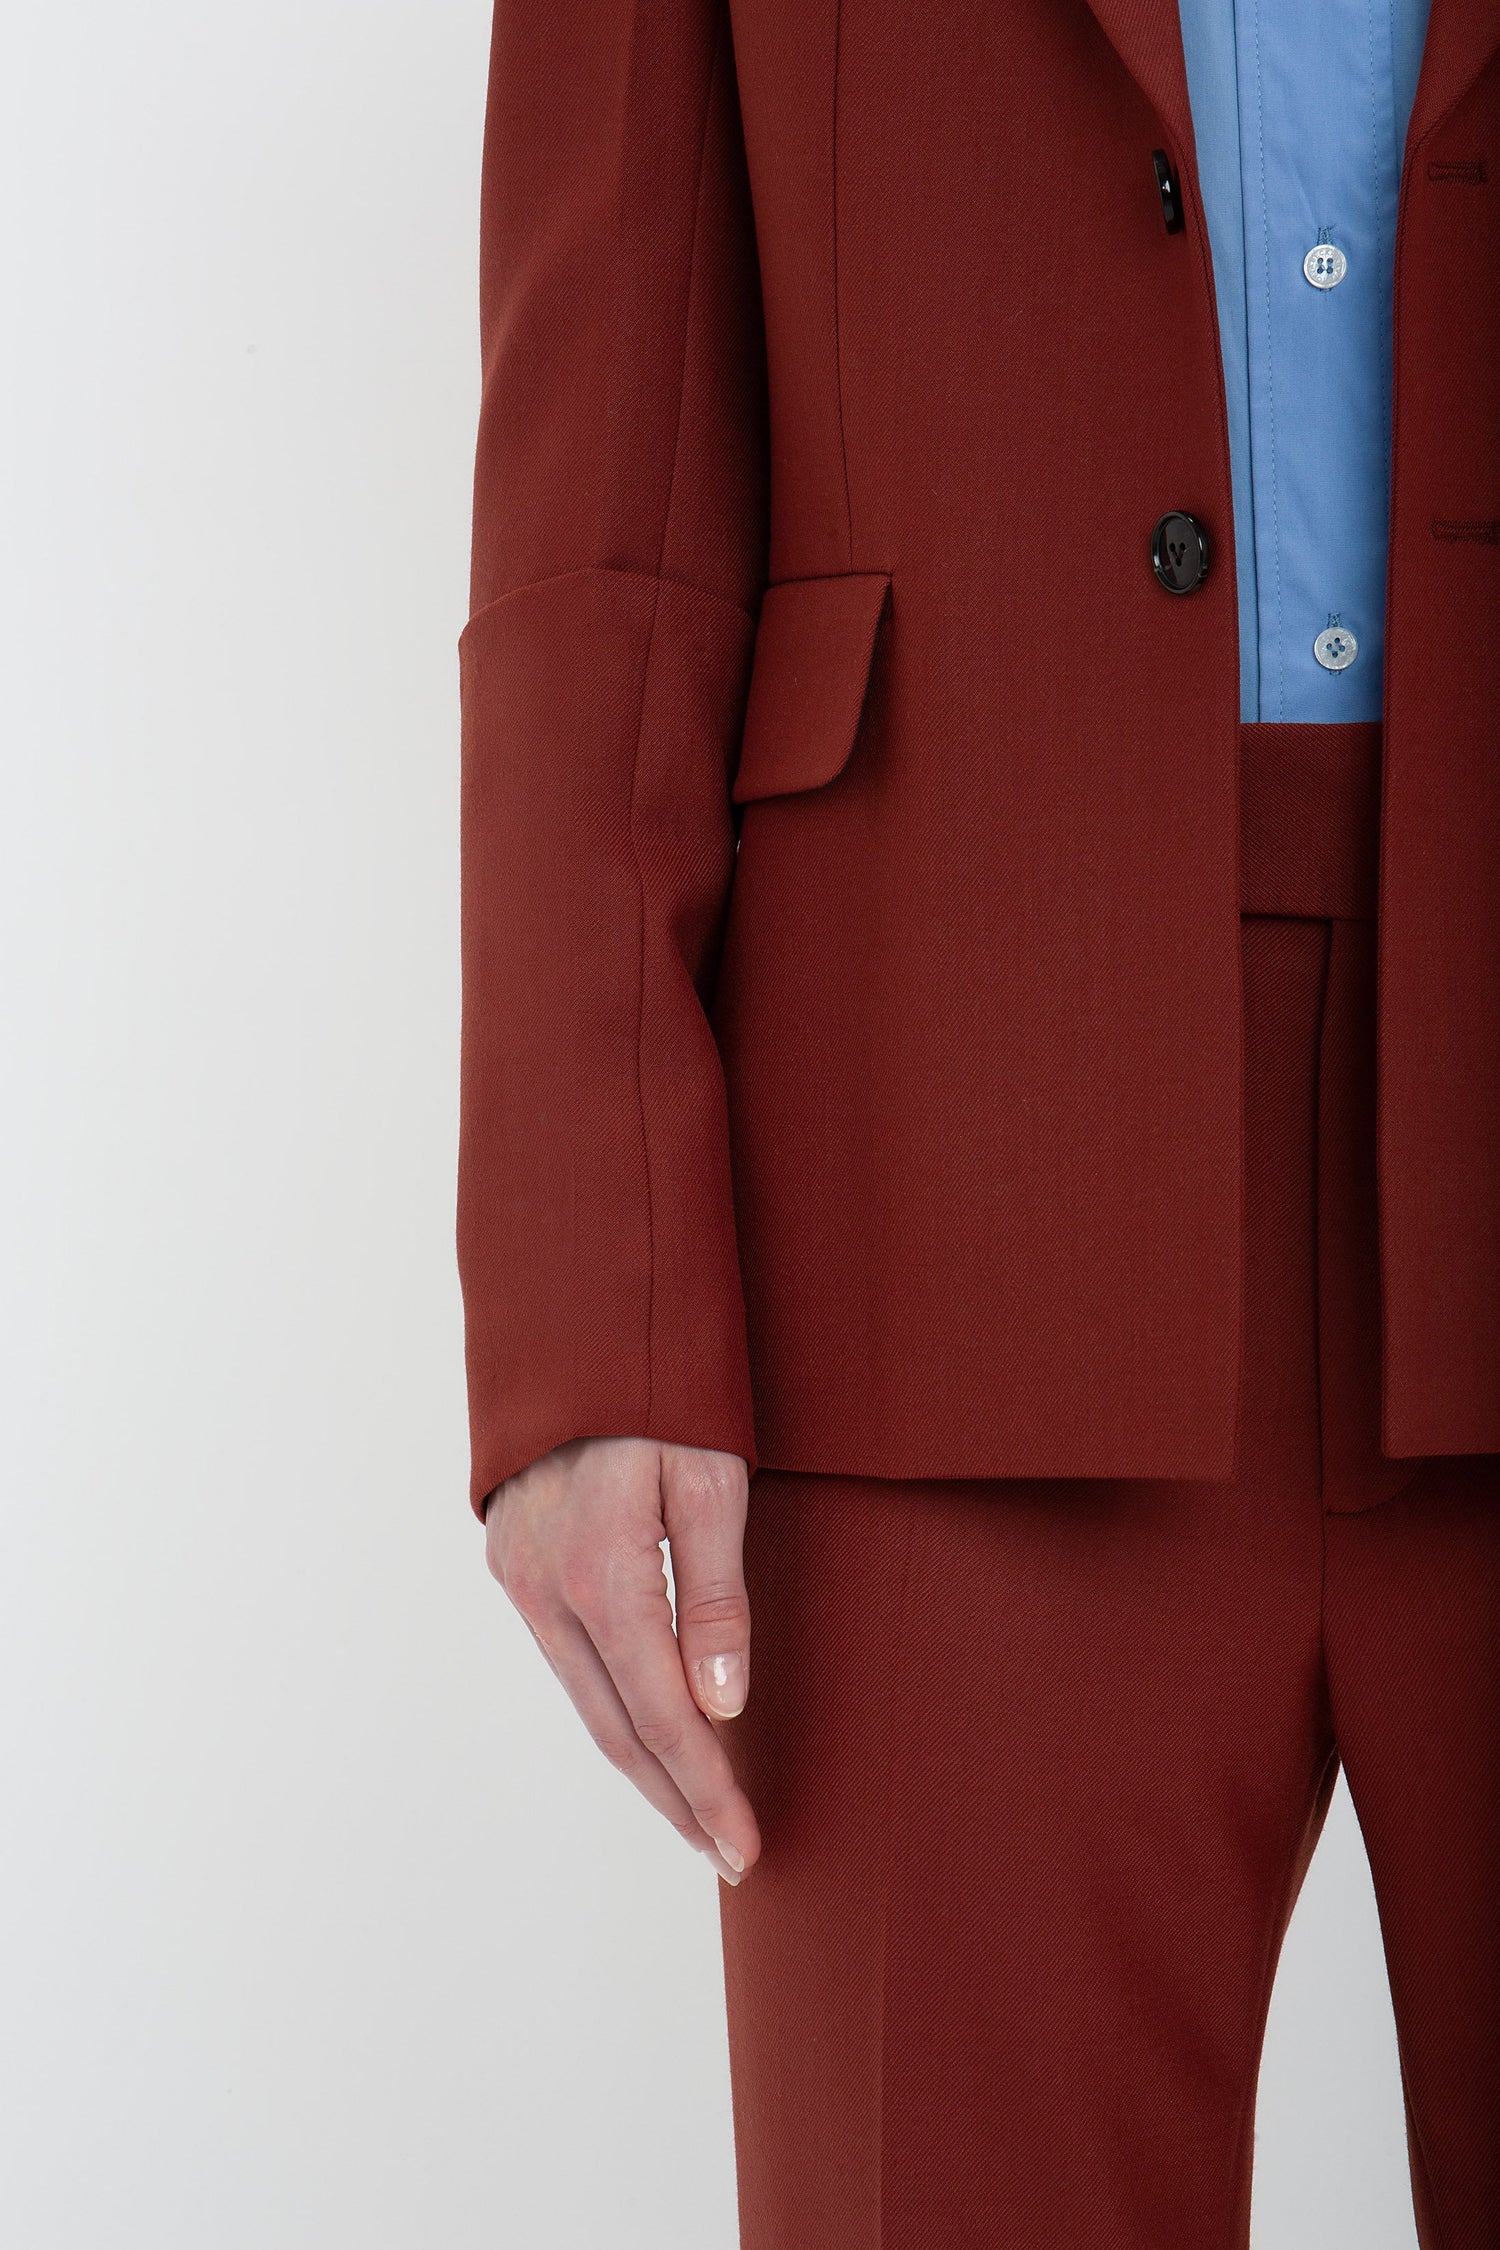 Close-up of a person wearing a Victoria Beckham Sleeve Detail Patch Pocket Jacket In Russet and matching pants in recycled wool, with a light blue shirt underneath. The image shows the person's left arm hanging by their side, accentuating the contemporary detailing of the outfit.